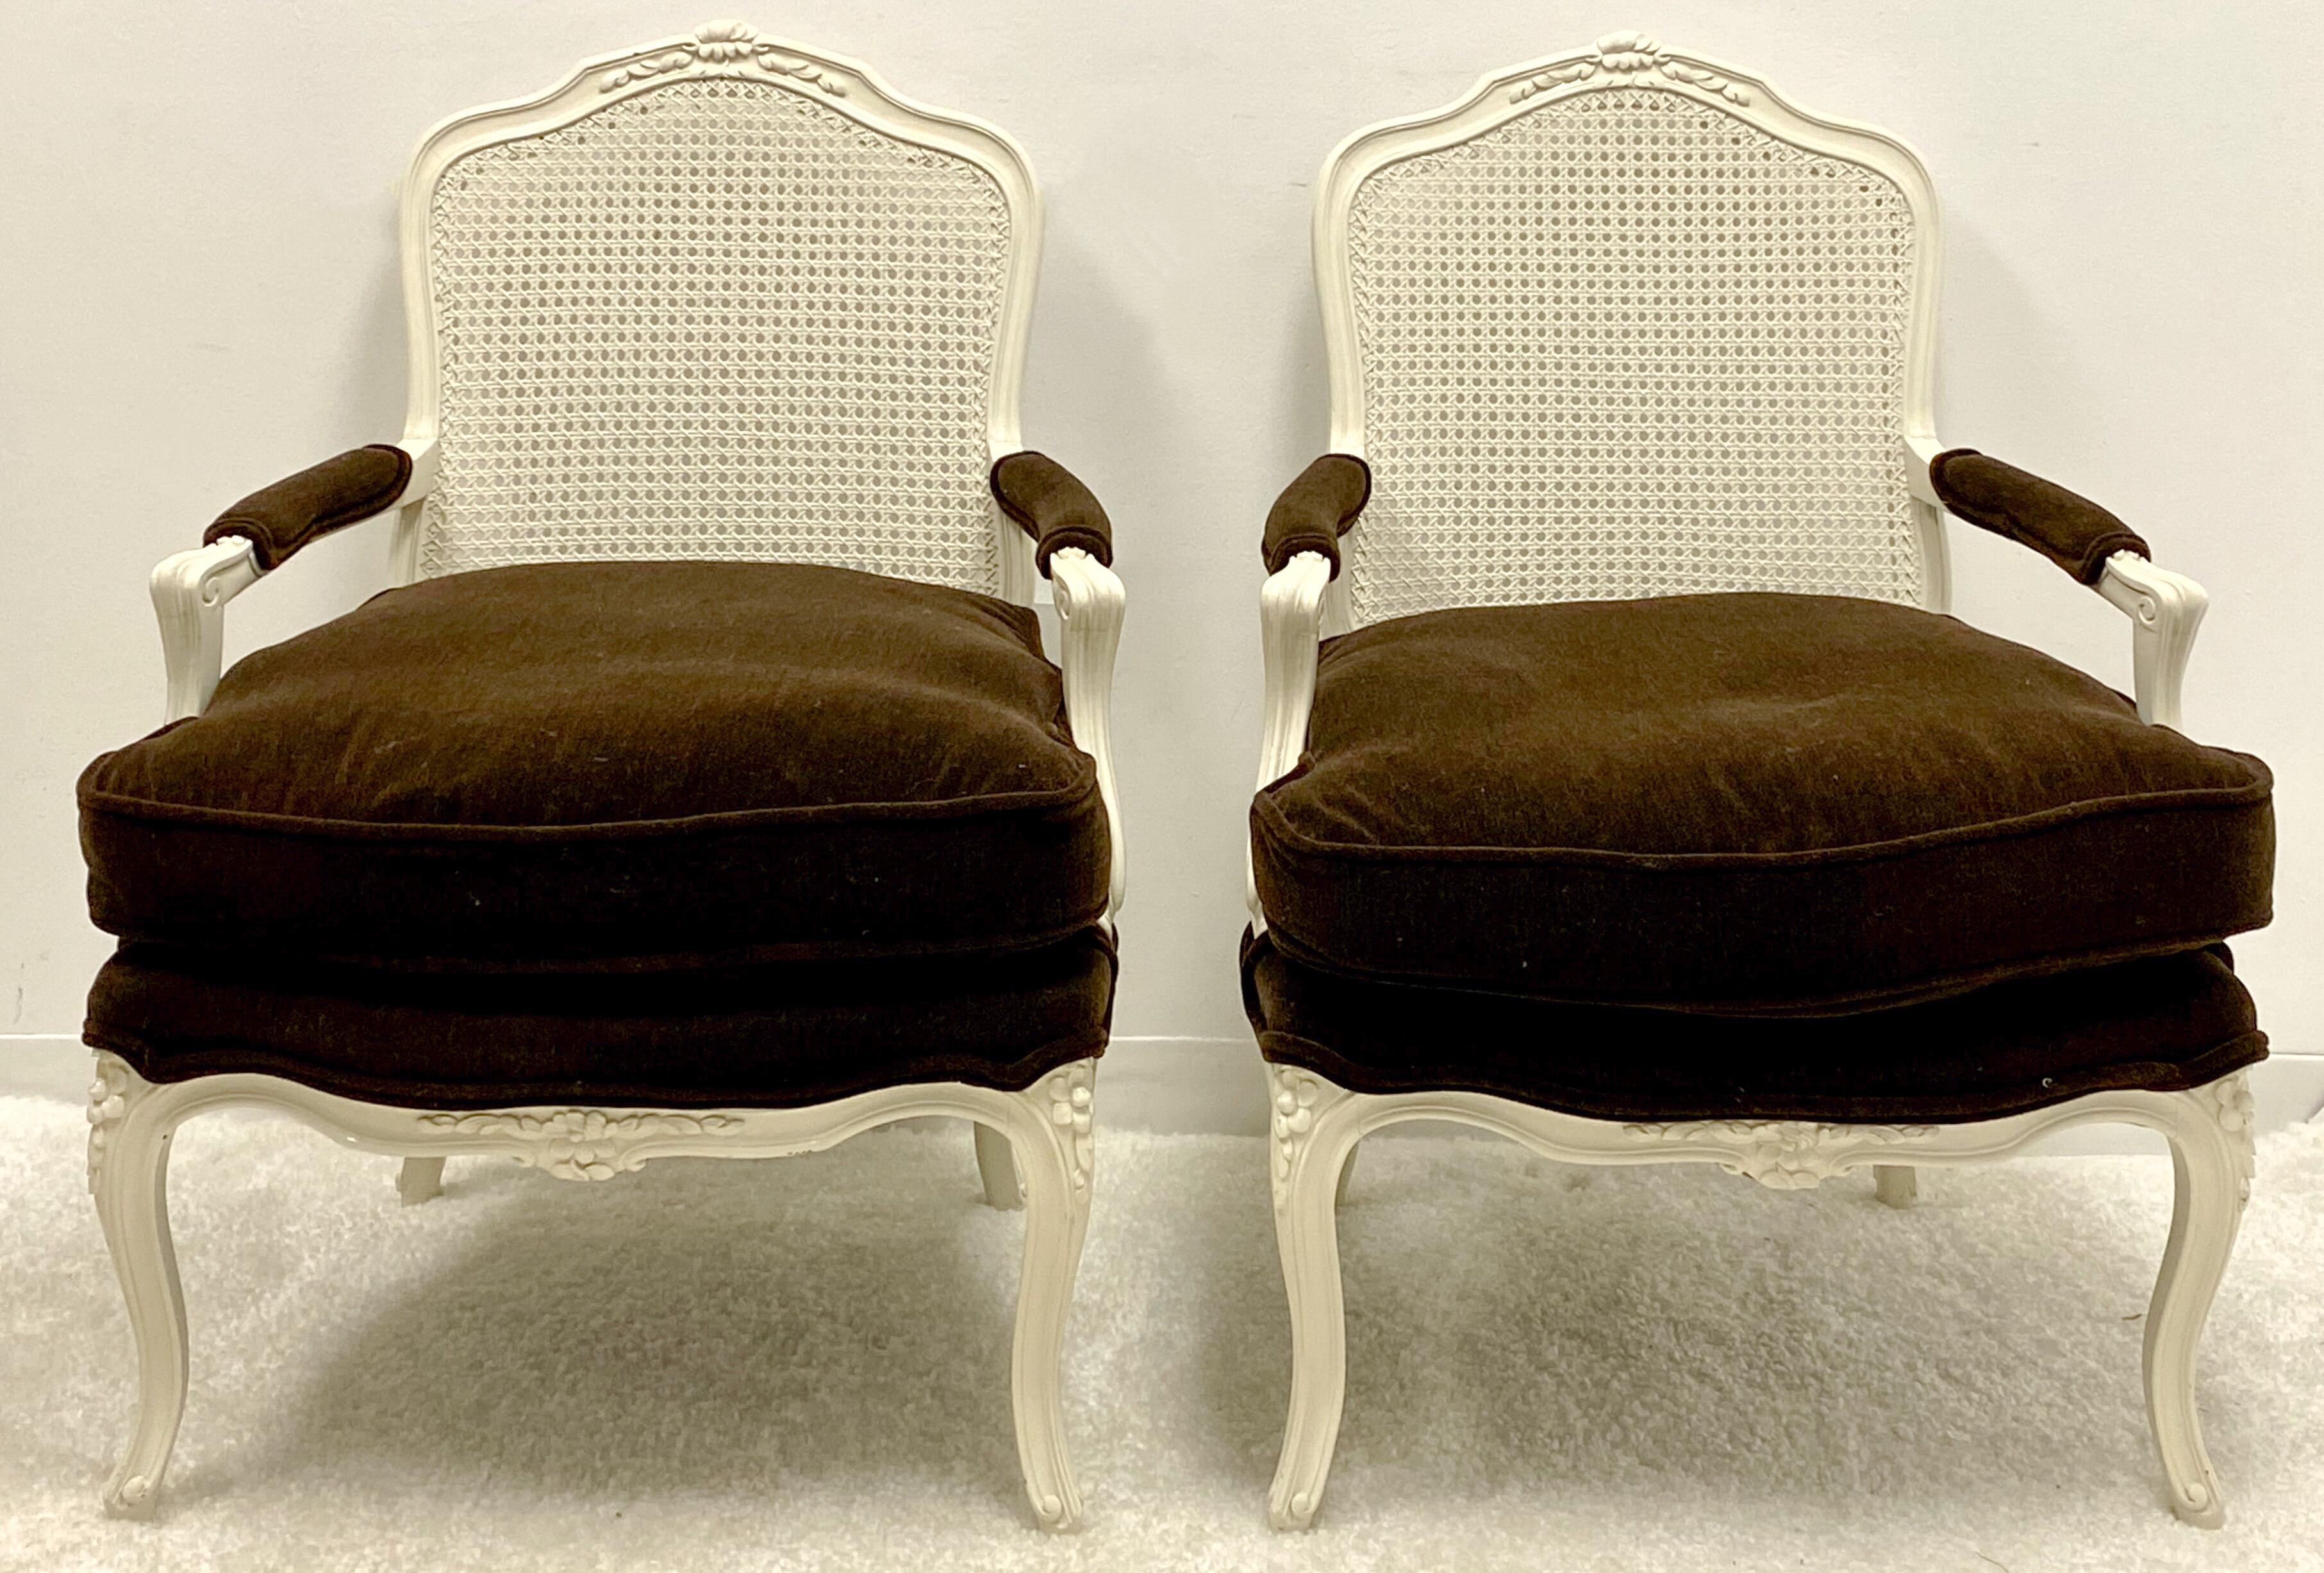 This is a mid-century French style pair of painted bergere chairs in brown mohair upholstery. The cushions are a thick down. The frames are painted white. They are in very good condition.